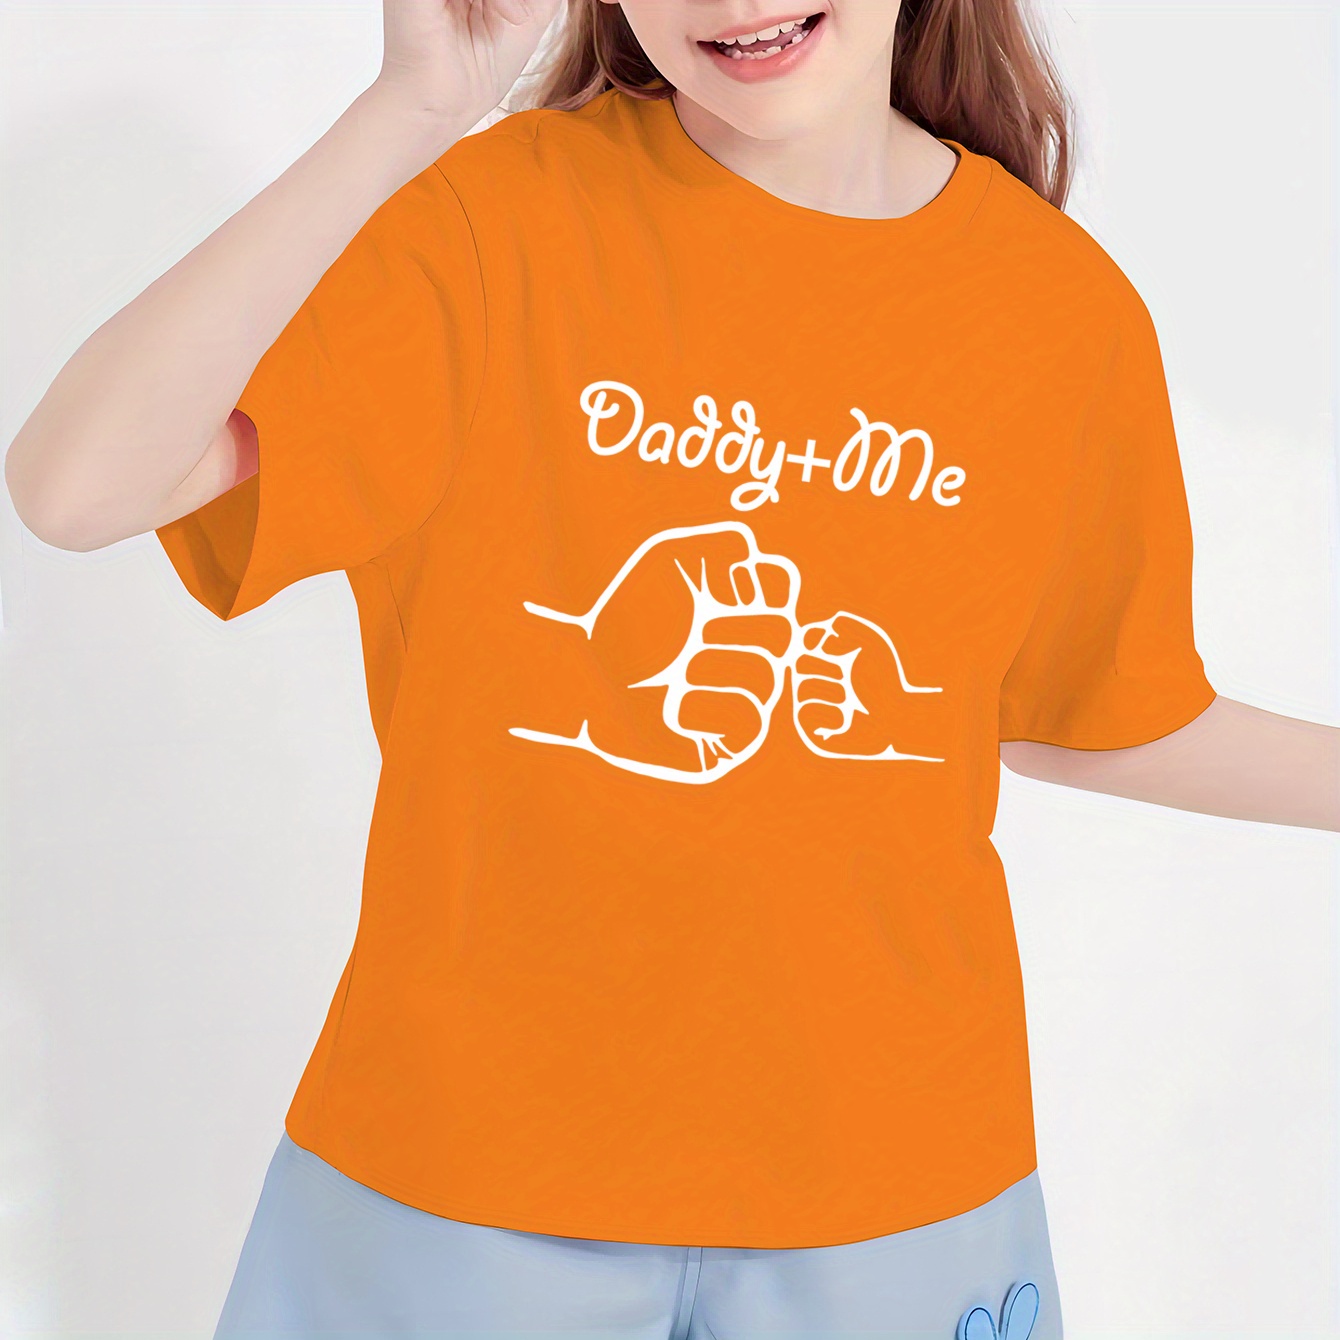 

Daddy + Me Father's Day Print Fashion Crew Neck Short Sleeve T-shirt, Girls Casual Quick Dry Pullover Tops For Spring Summer